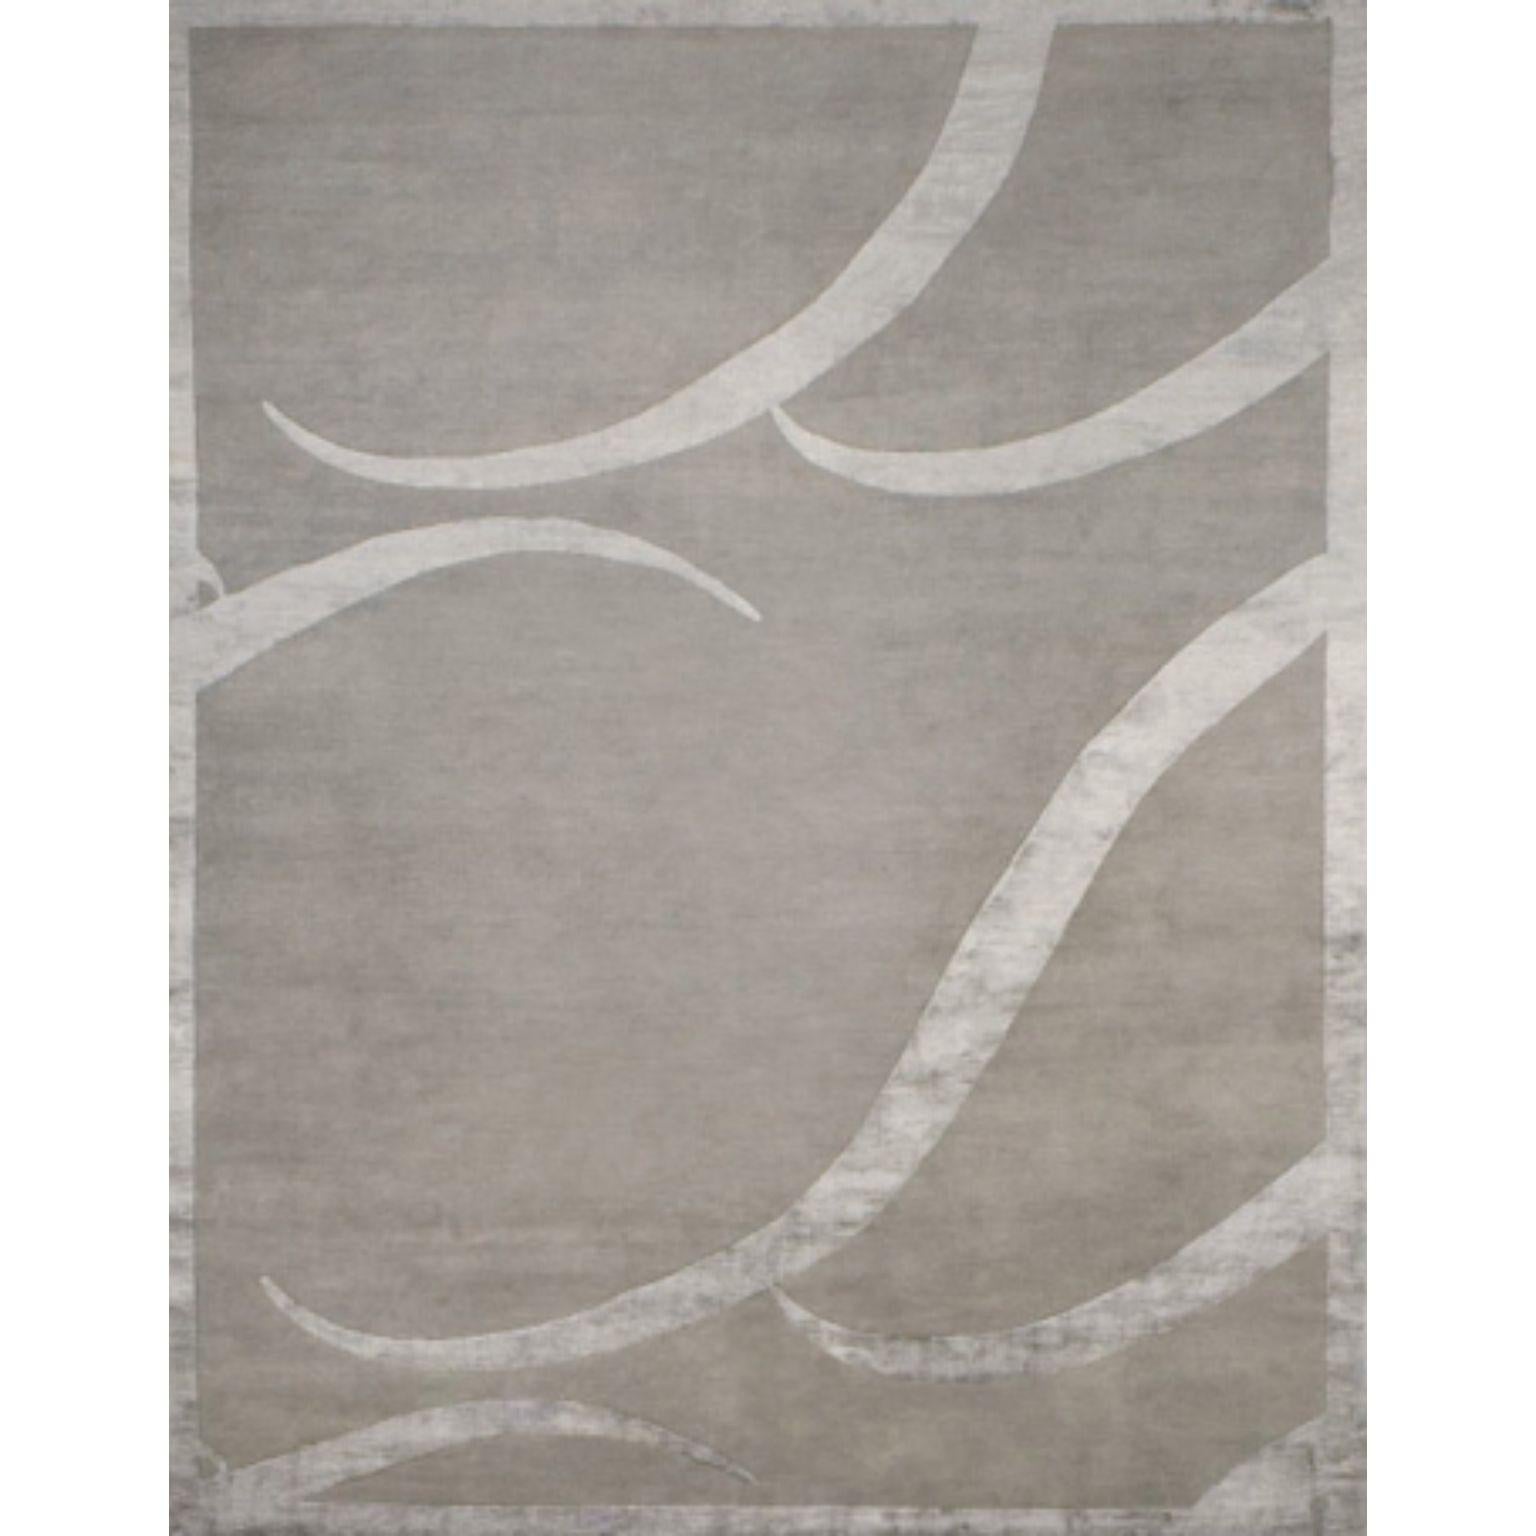 DIS 200 rug by Illulian
Dimensions: D300 x H200 cm 
Materials: Wool 80%, Silk 20%
Variations available and prices may vary according to materials and sizes. 

Illulian, historic and prestigious rug company brand, internationally renowned in the